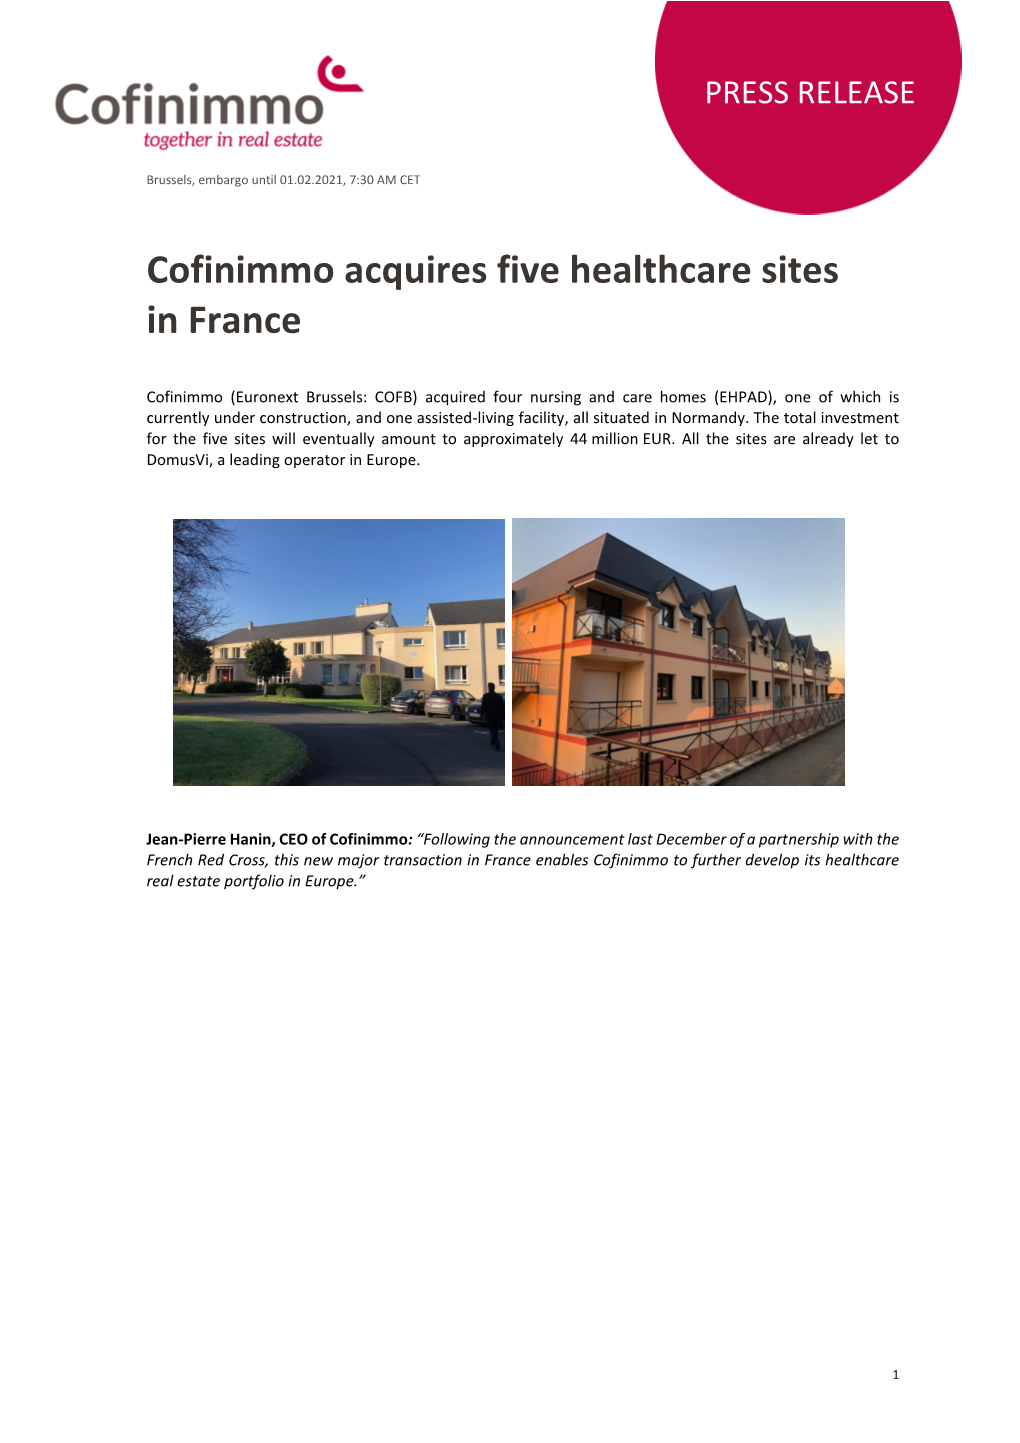 Cofinimmo Acquires Five Healthcare Sites in France